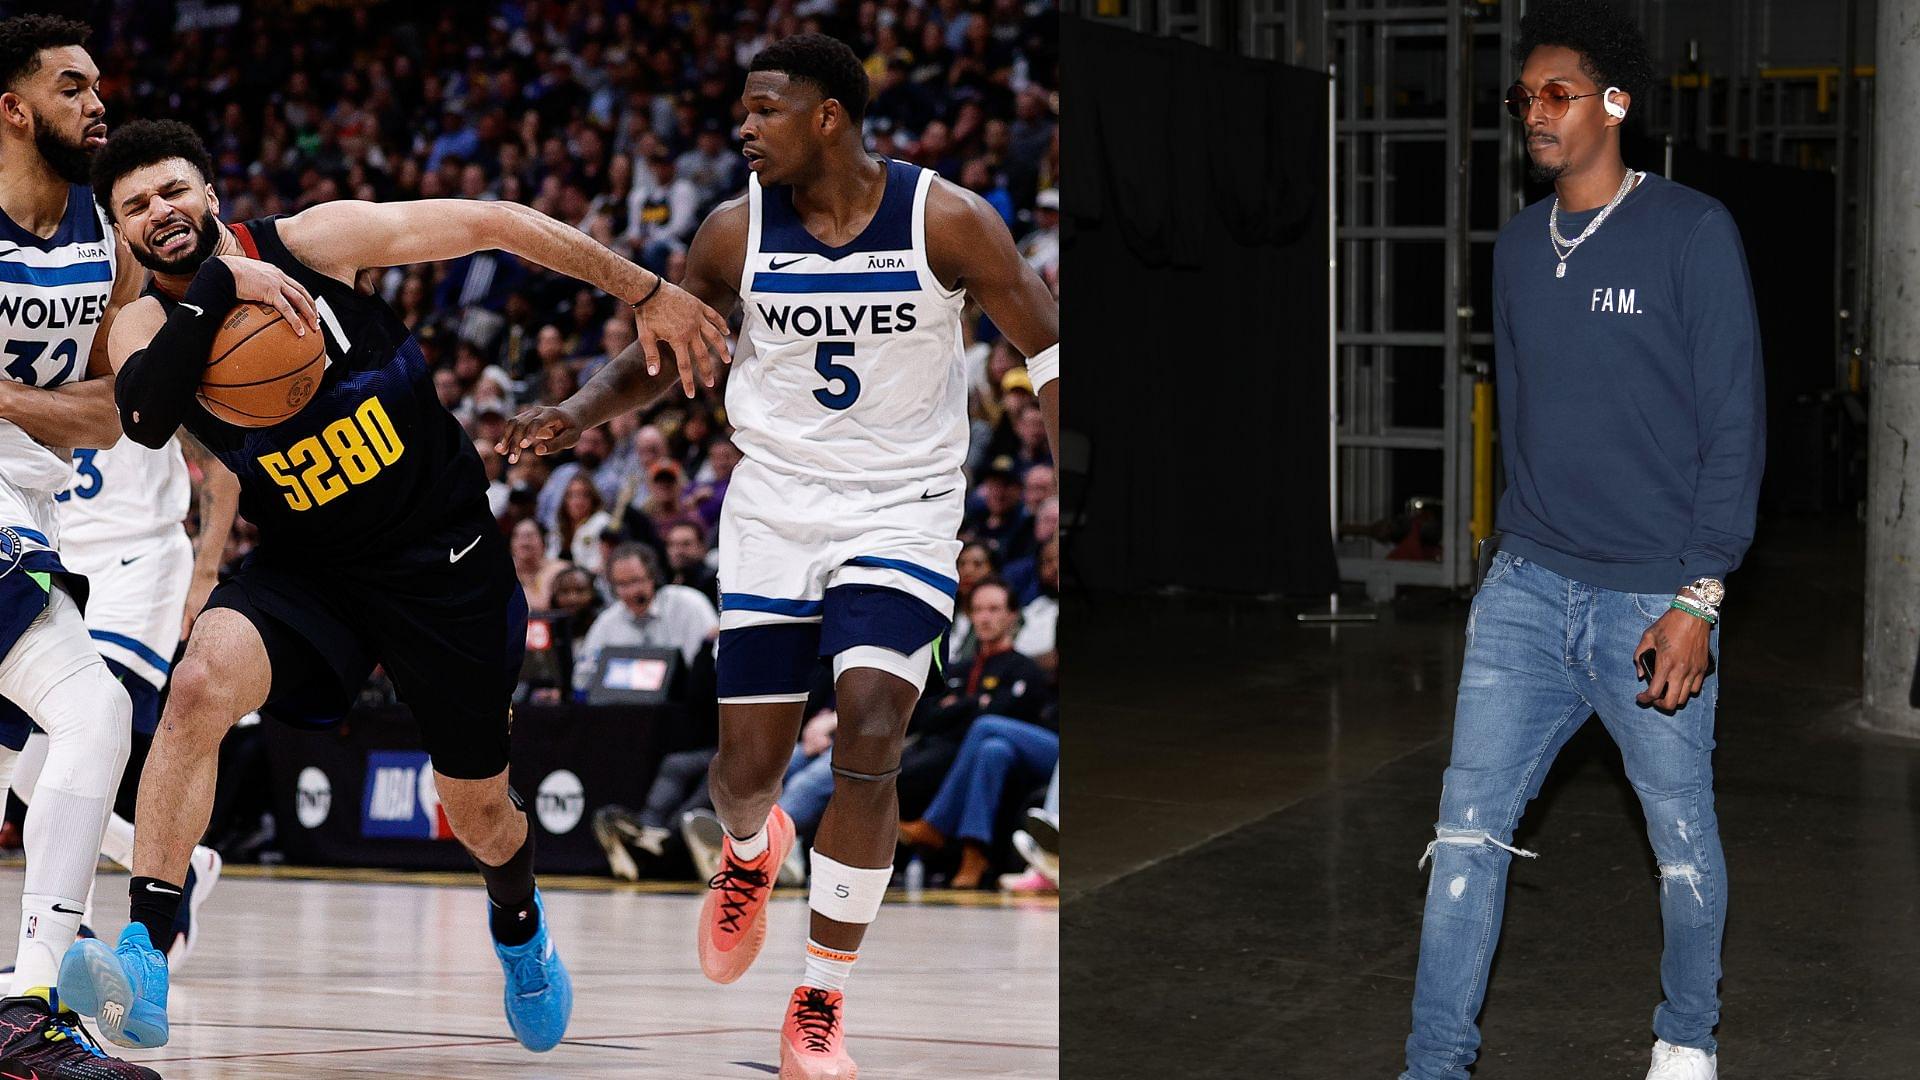 "Finish Getting Your A** Whooped": Former Clippers Star Takes a Subtle Dig At Jamal Murray Facing $100,000 Fine